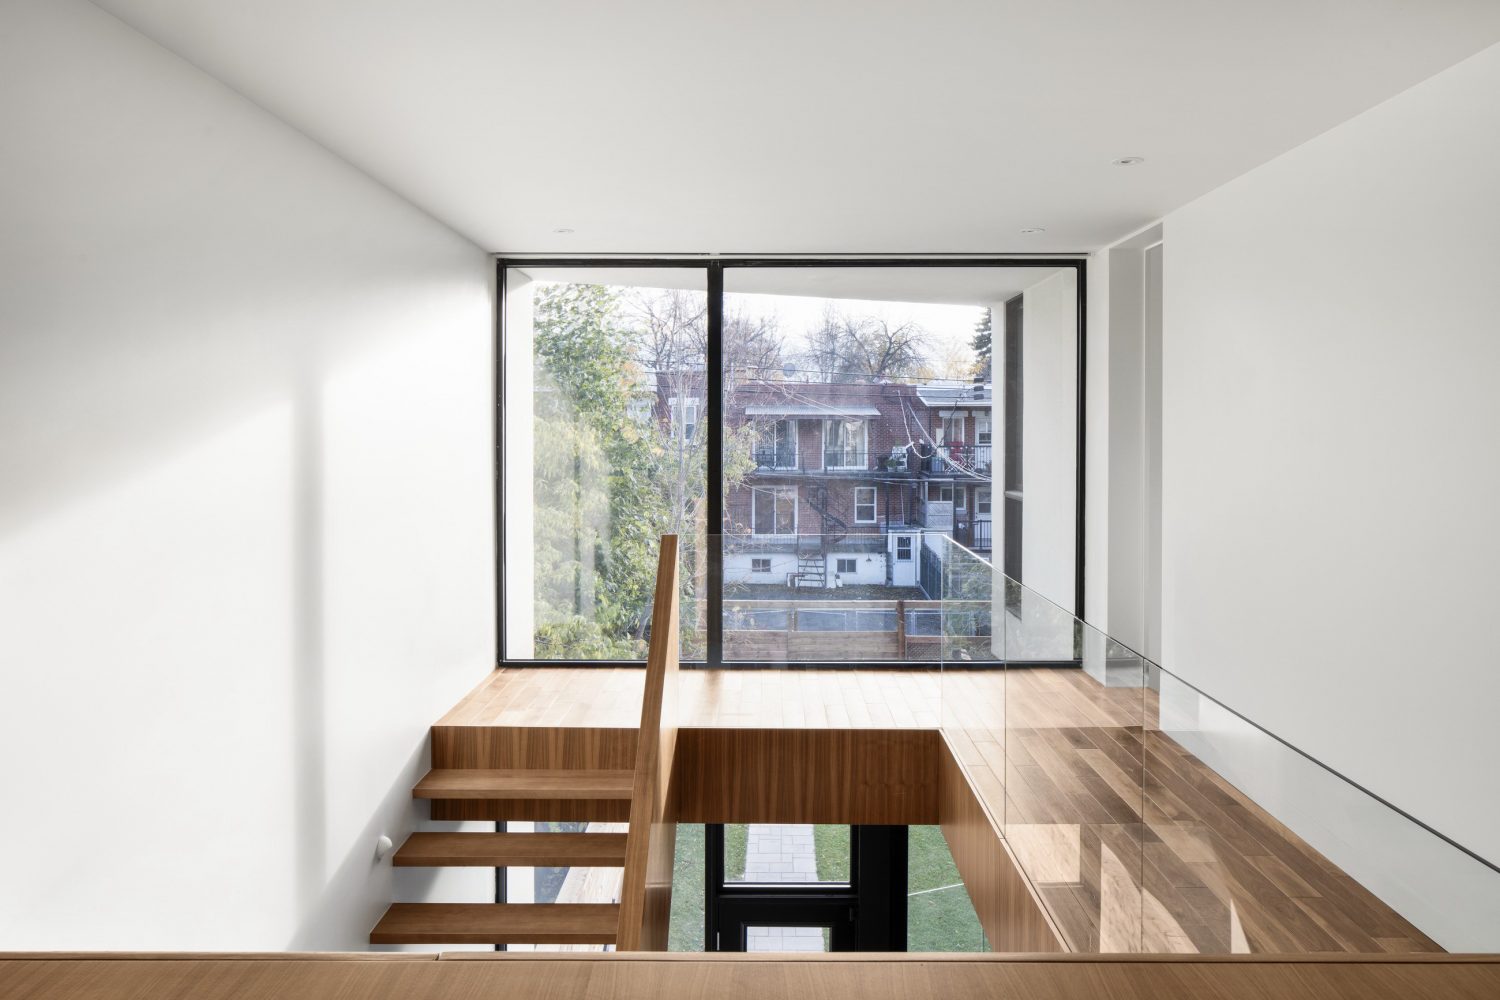 1st Avenue Residence – Terraced House Renovation by Microclimat